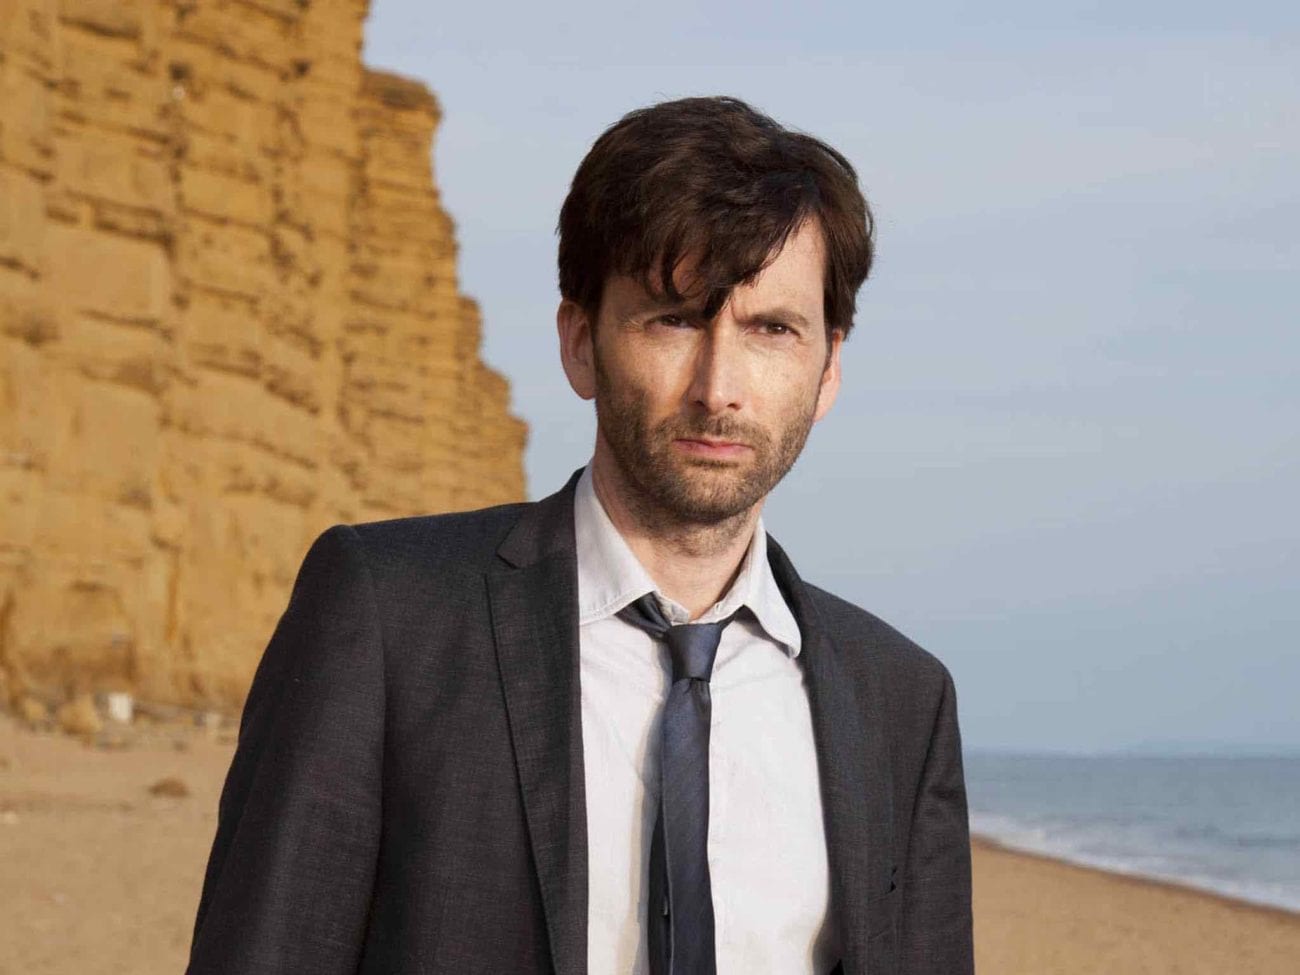 Netflix announced new international crime thriller series 'Criminal' starring David Tennant, so we did our best detective work about what to expect.